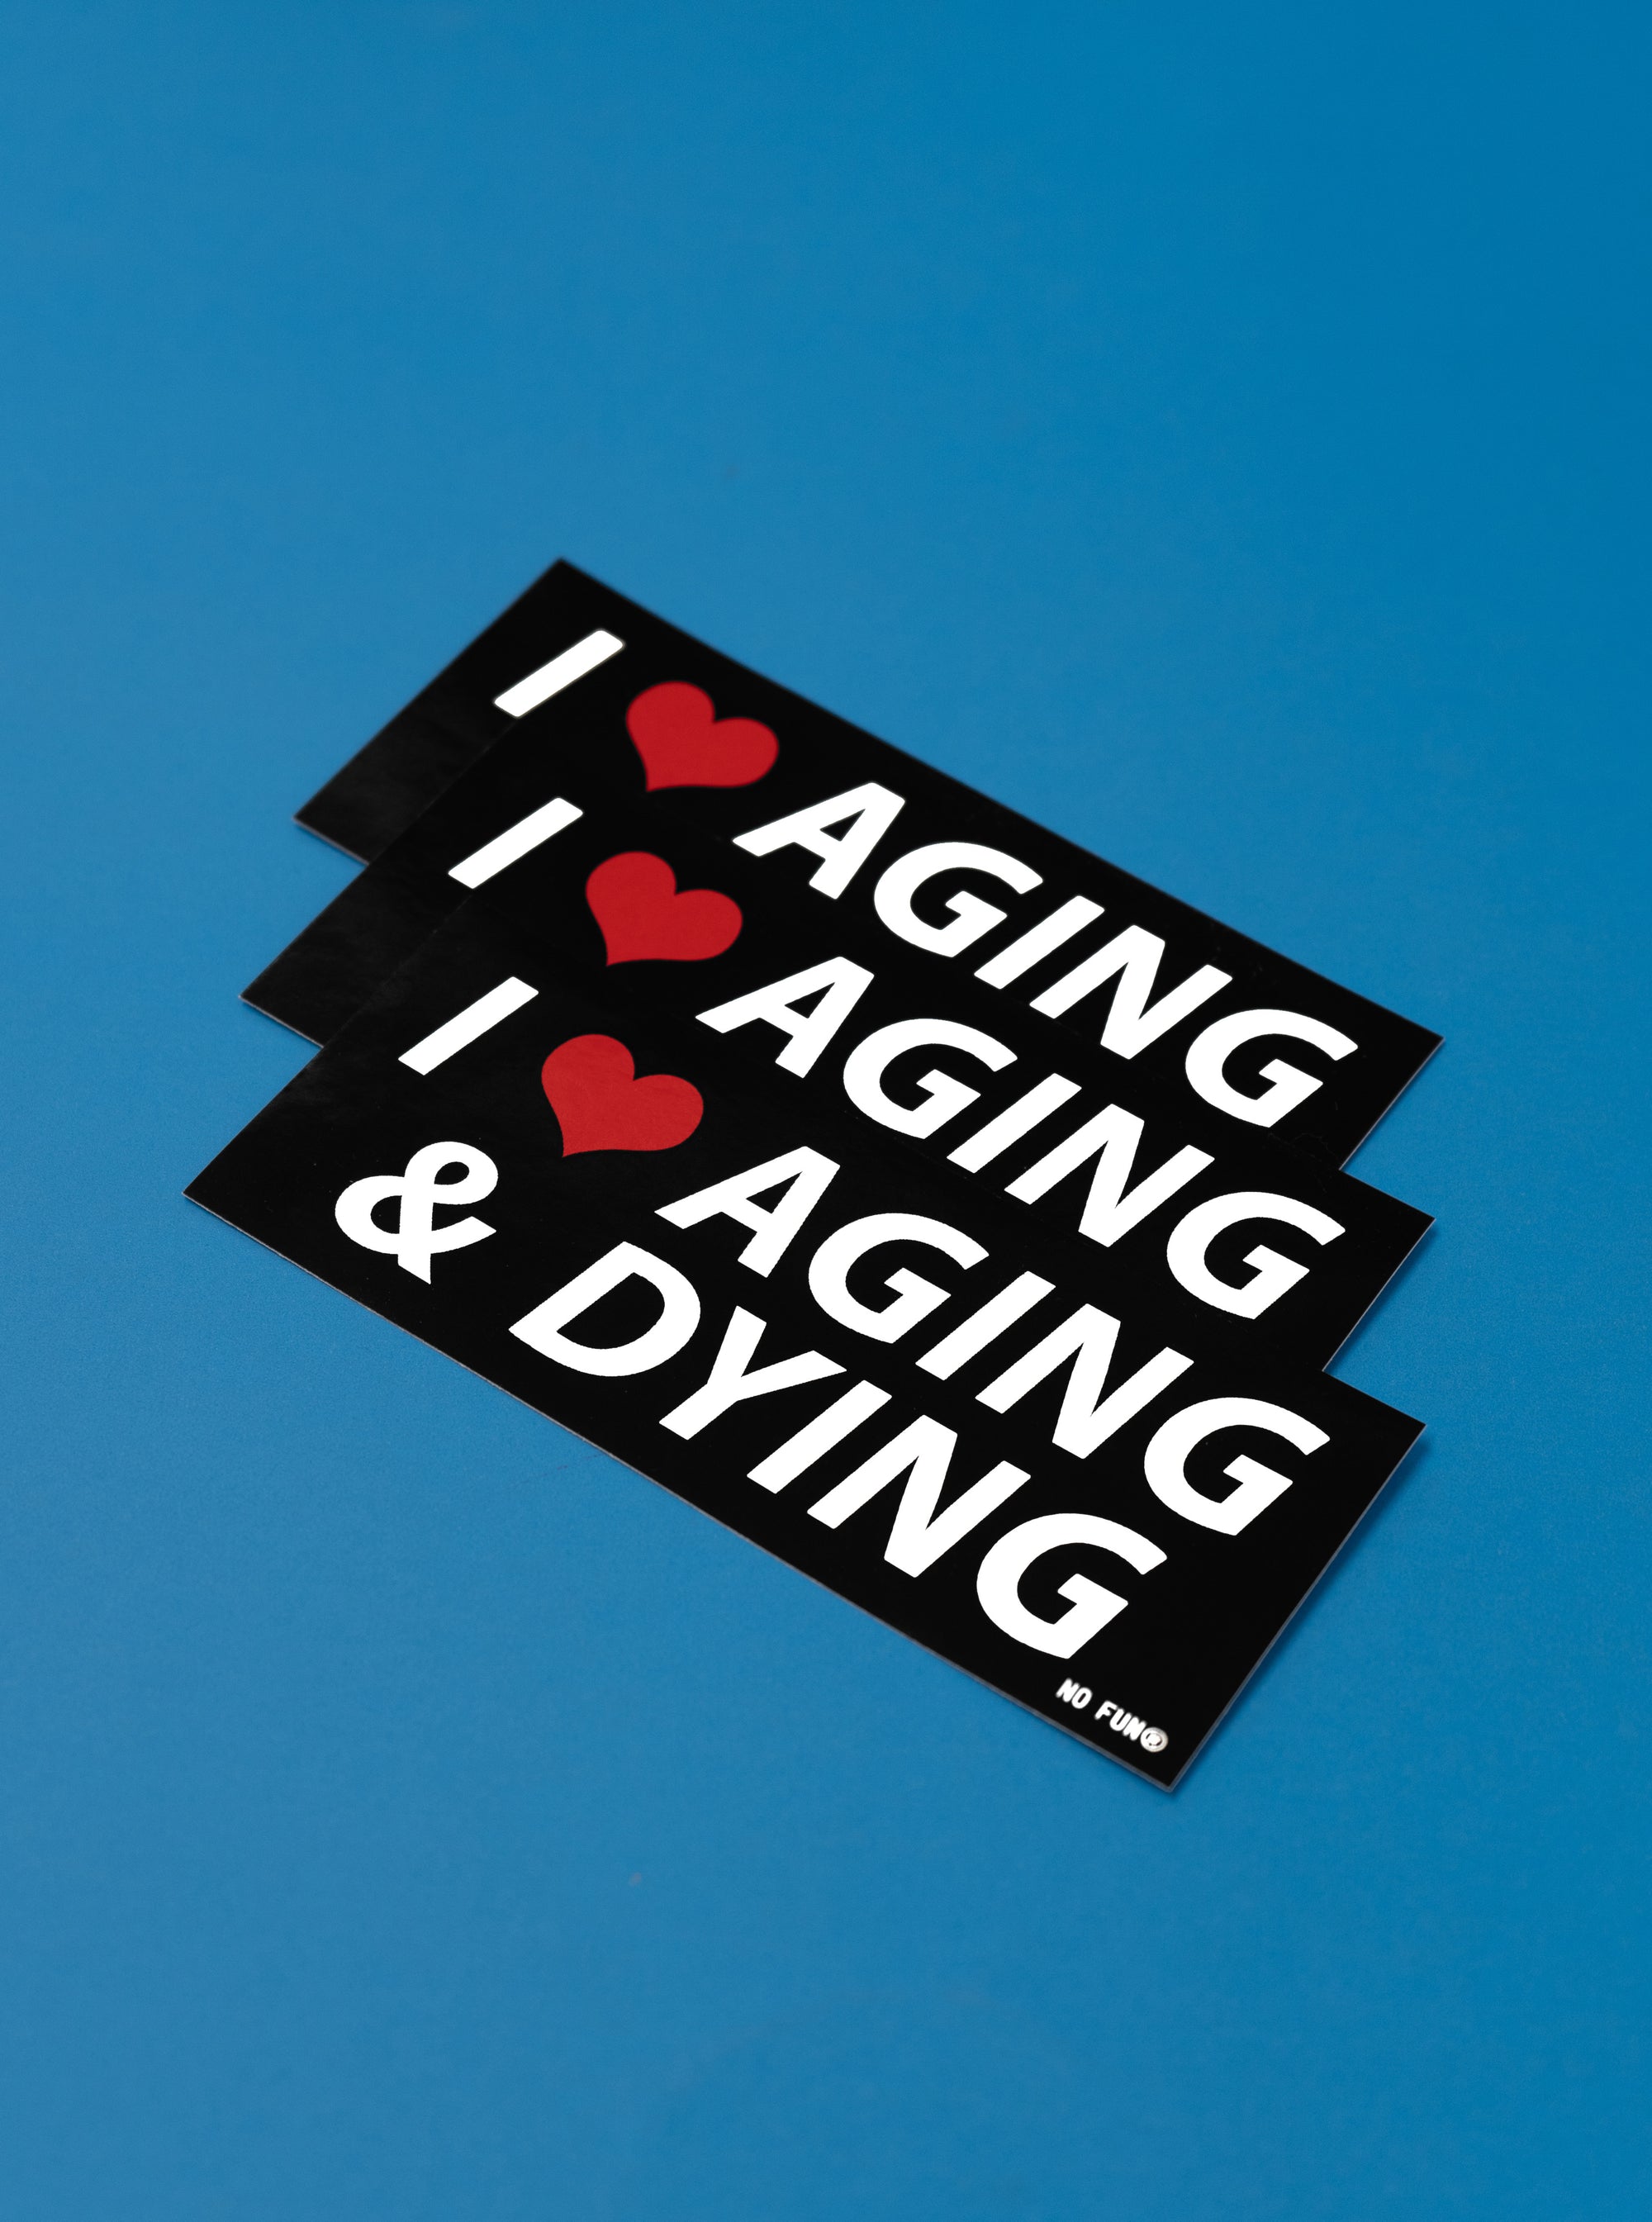 Three "Aging and Dying" Black bumper stickers in a row, slightly overlapped.